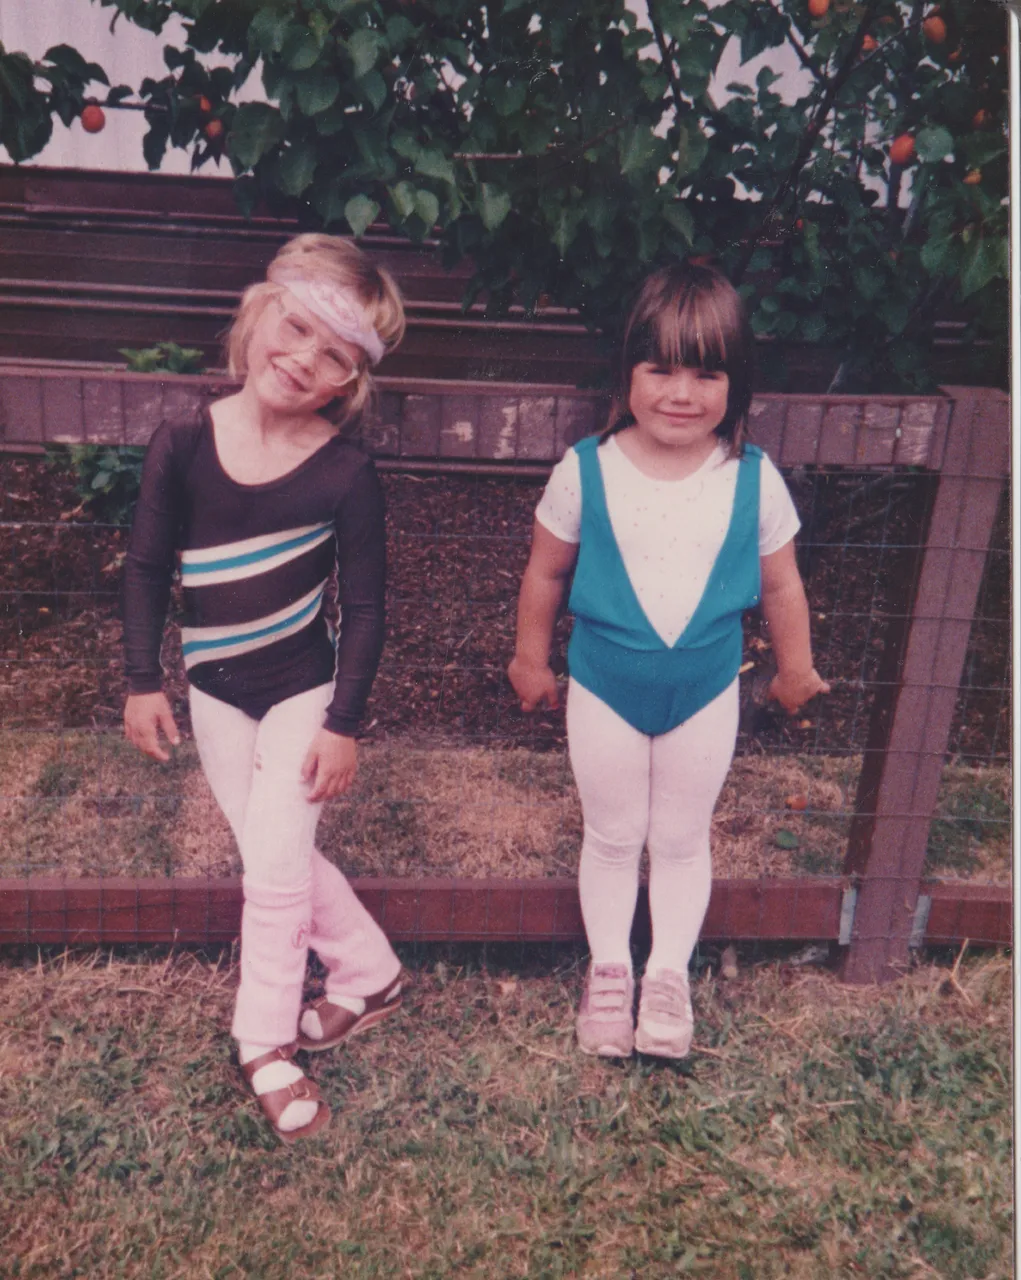 1985 Katie & Girl at FG House - apx date.png